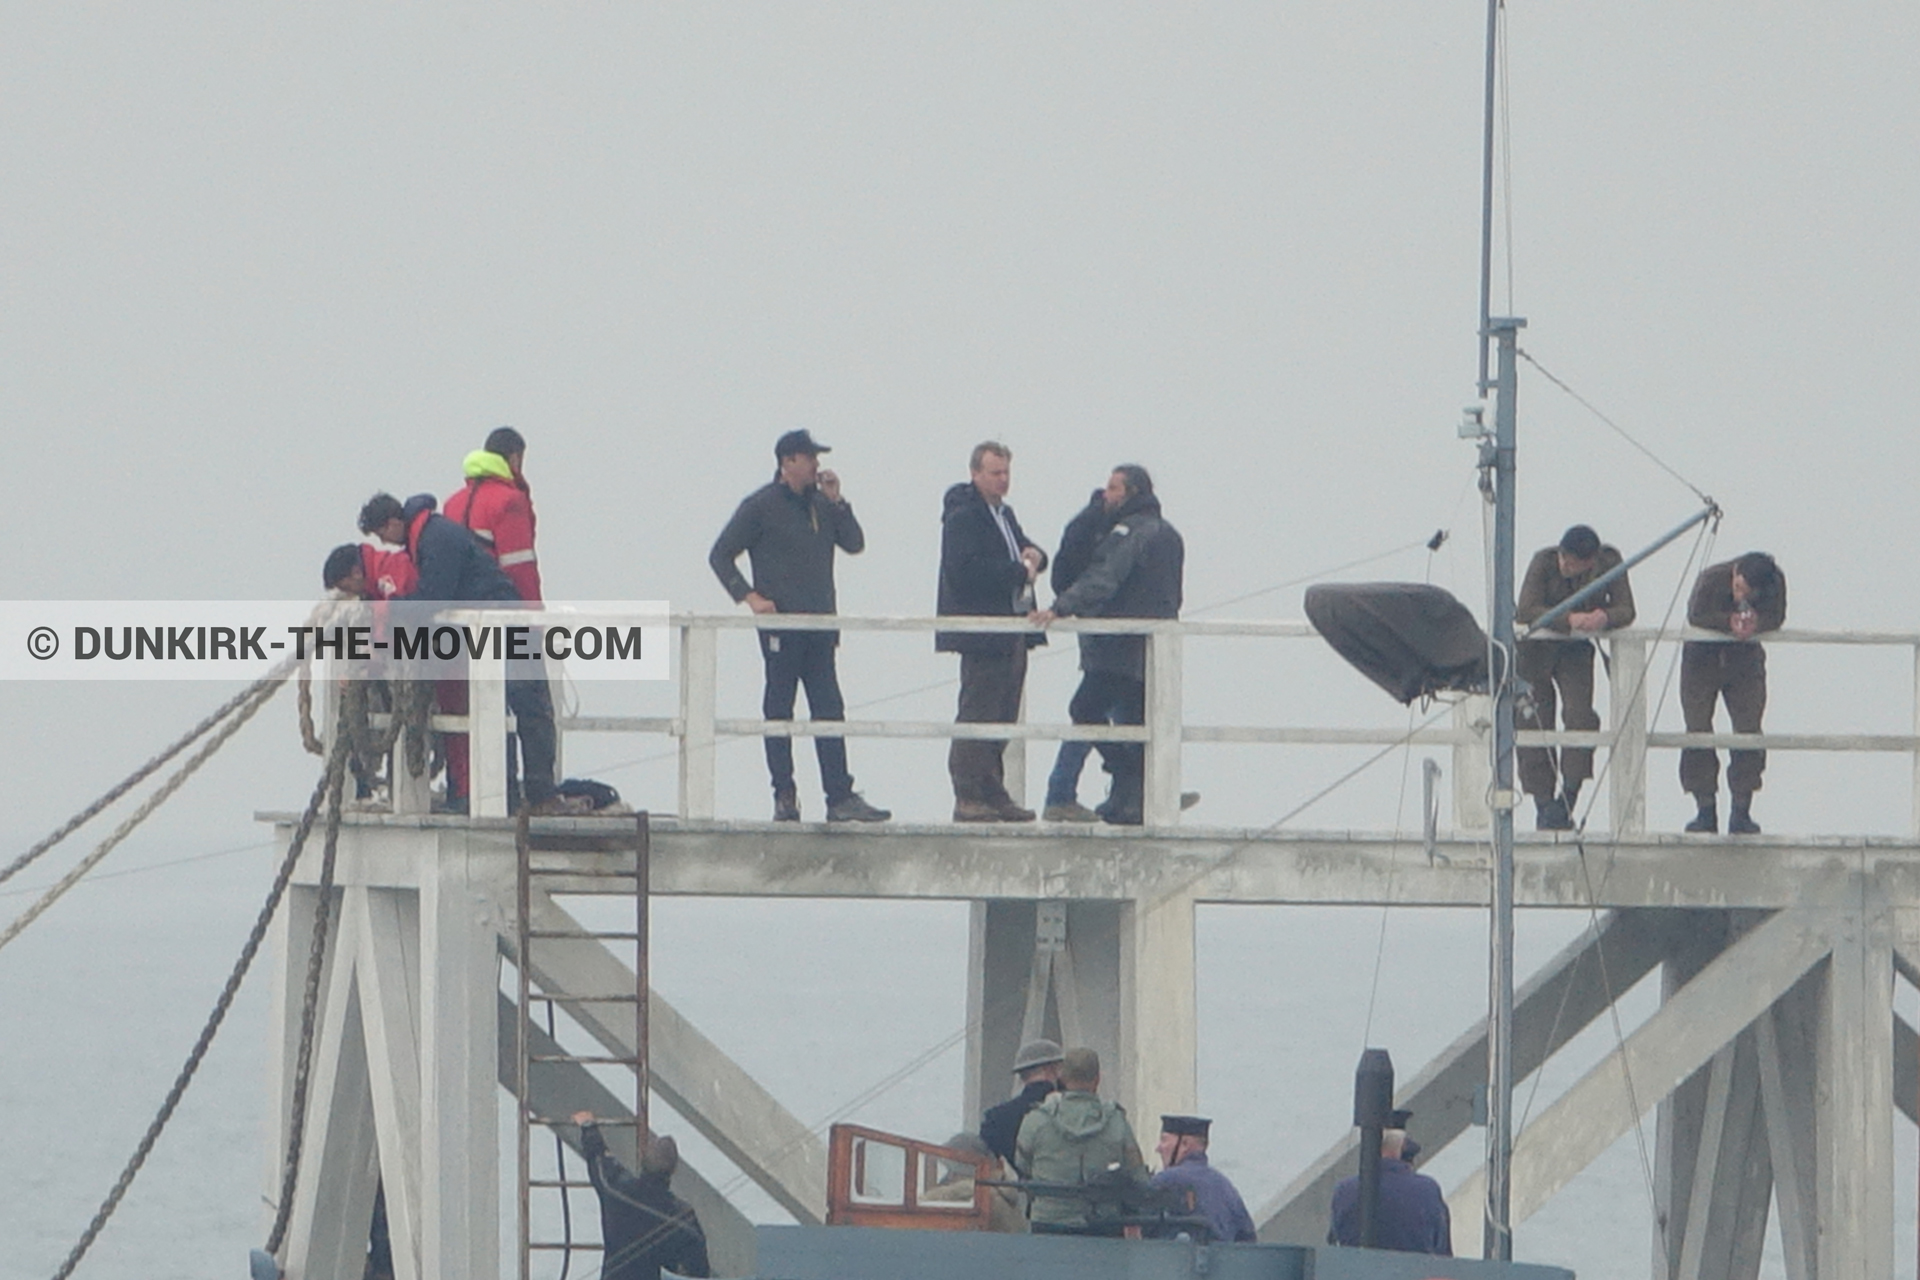 Picture with actor, grey sky, supernumeraries, HMS Medusa - ML1387, Hoyte van Hoytema, EST pier, Christopher Nolan,  from behind the scene of the Dunkirk movie by Nolan